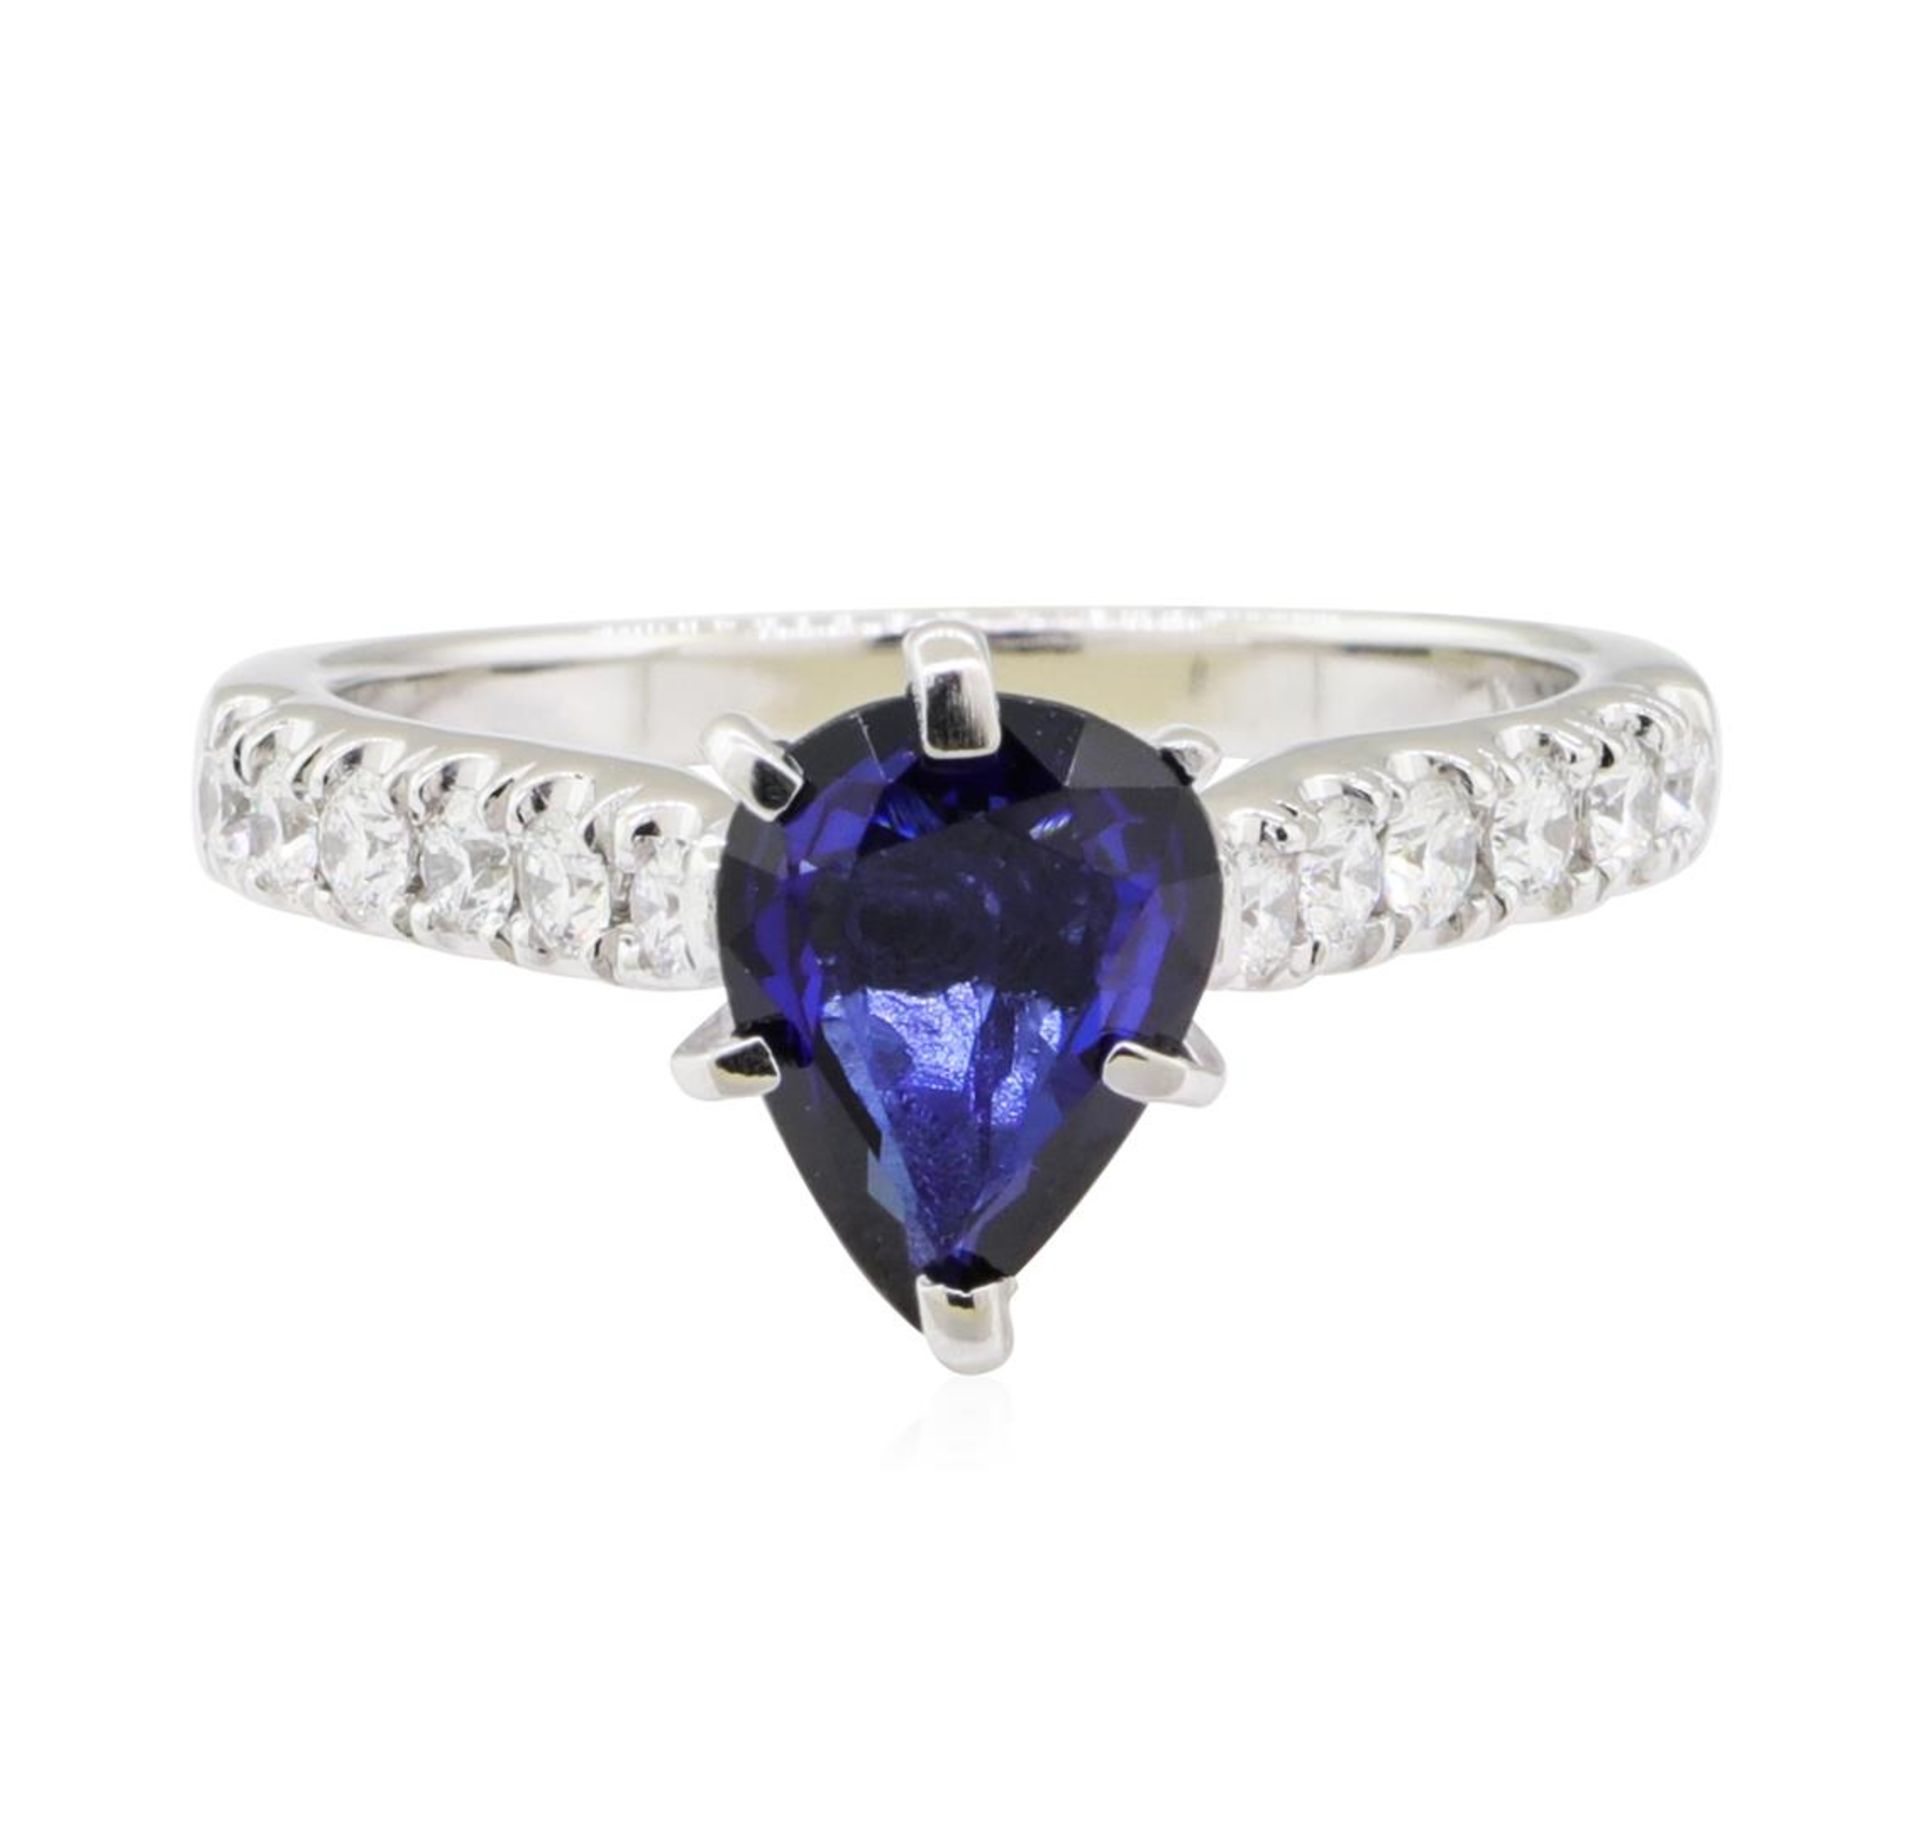 1.99 ctw Sapphire and Diamond Ring - 14KT White Gold - Image 2 of 5